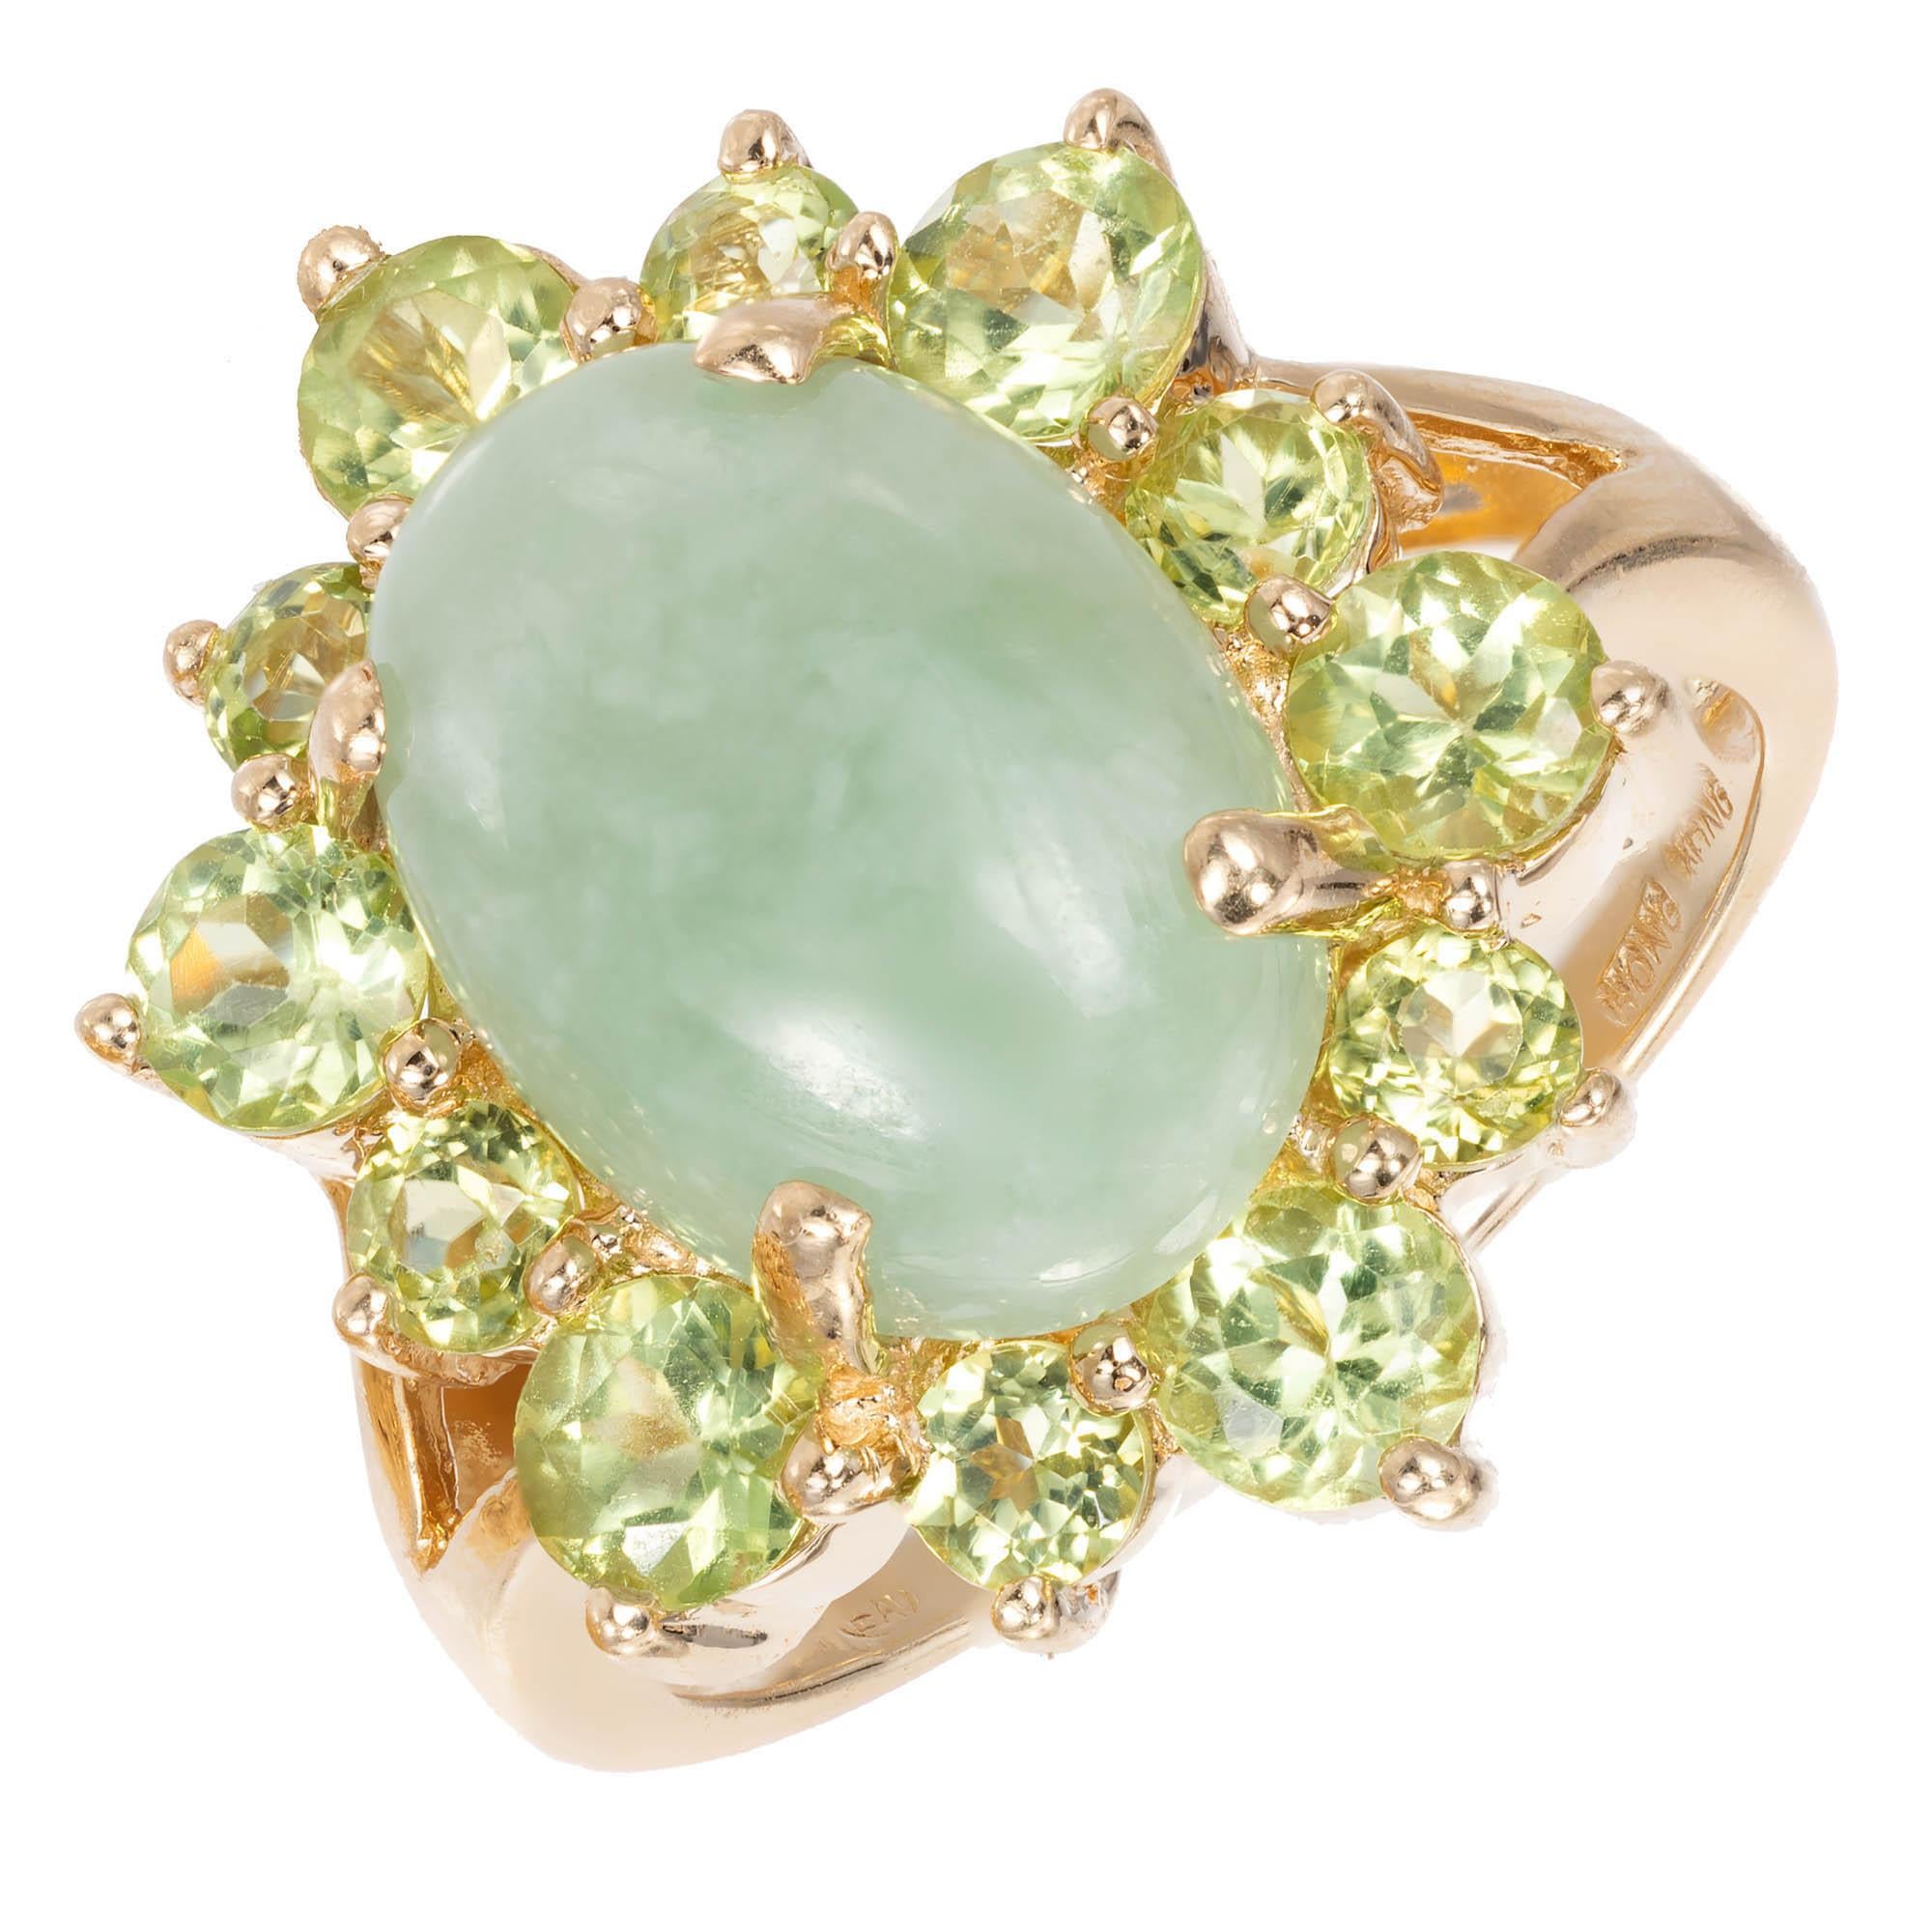  Jadeite Jade and Peridot cocktail ring. Large oval natural light green Jadeite Jade cabochon surrounded by round a green Peridot halo alternating in size to give dimension to this ring.

1 oval cabochon mottled light green Jadeite Jade, 14.04 x